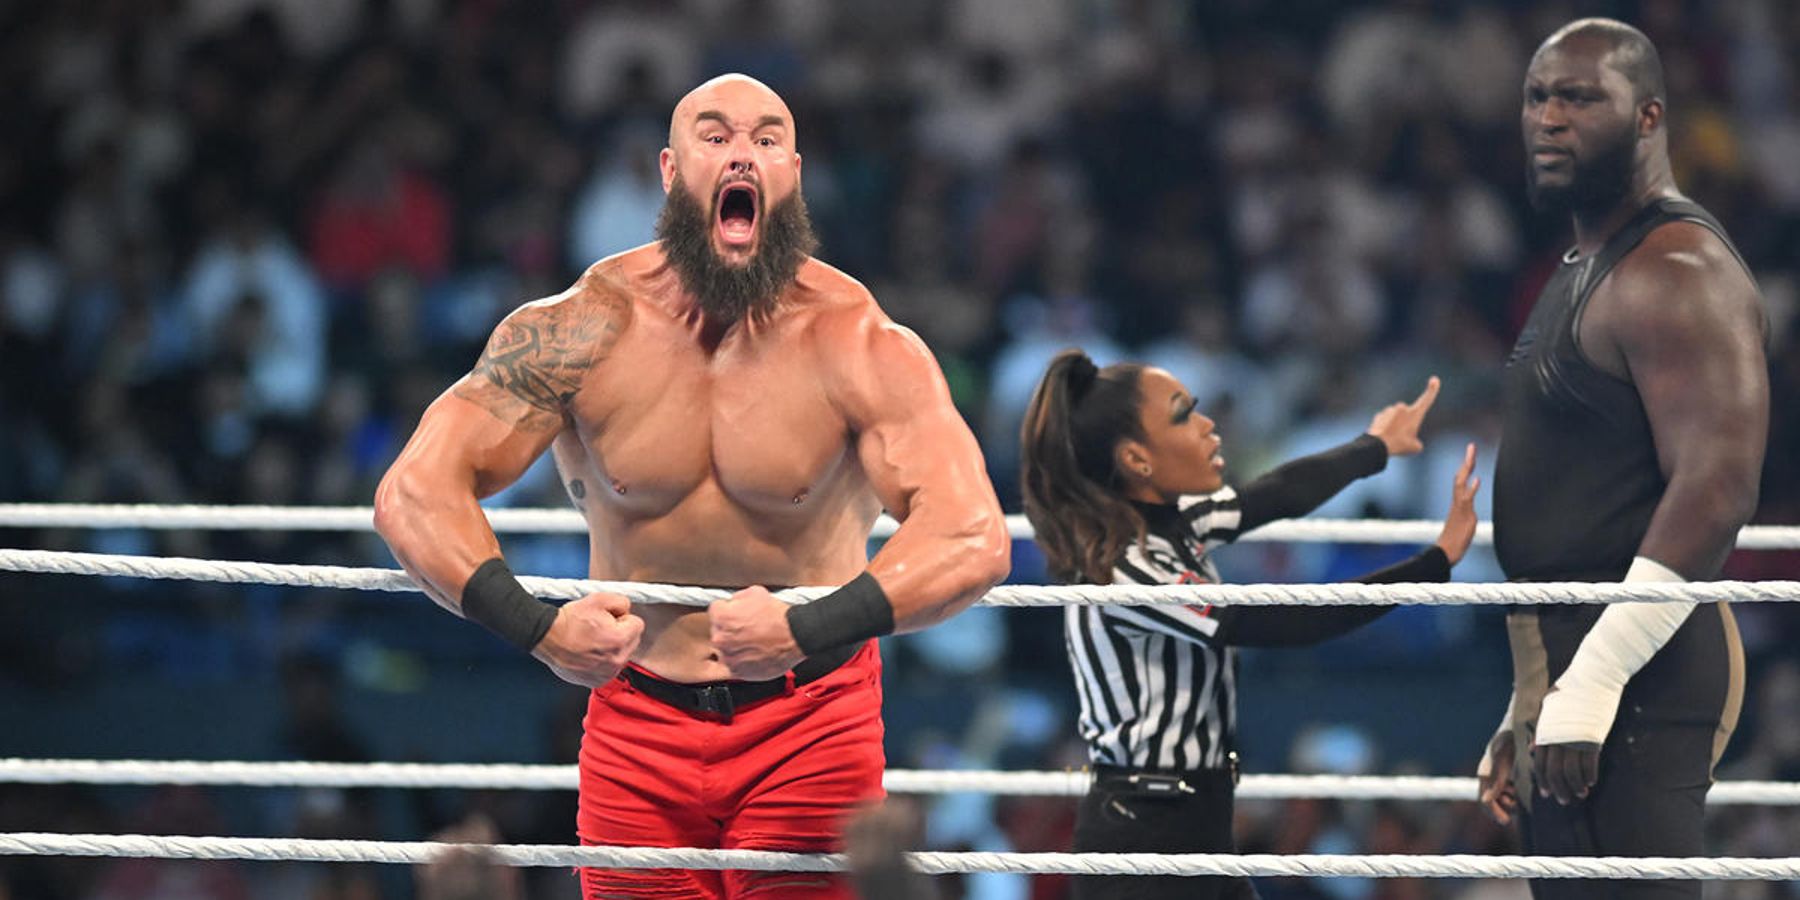 Braun Strowman performs during WWE Crown Jewel while Omos looks on.